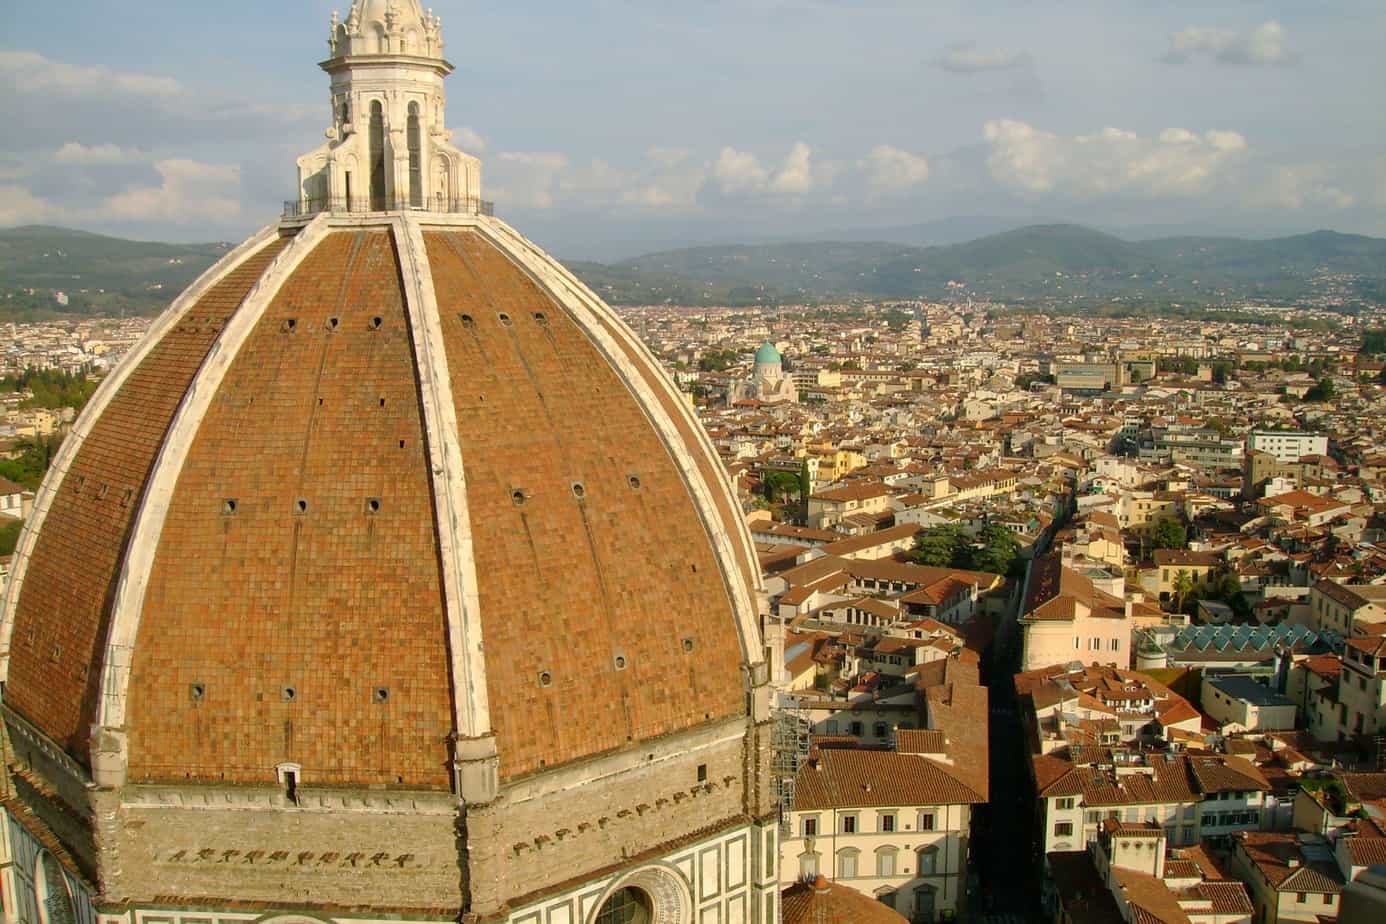 Terra cotta dome with view of Florence in the background